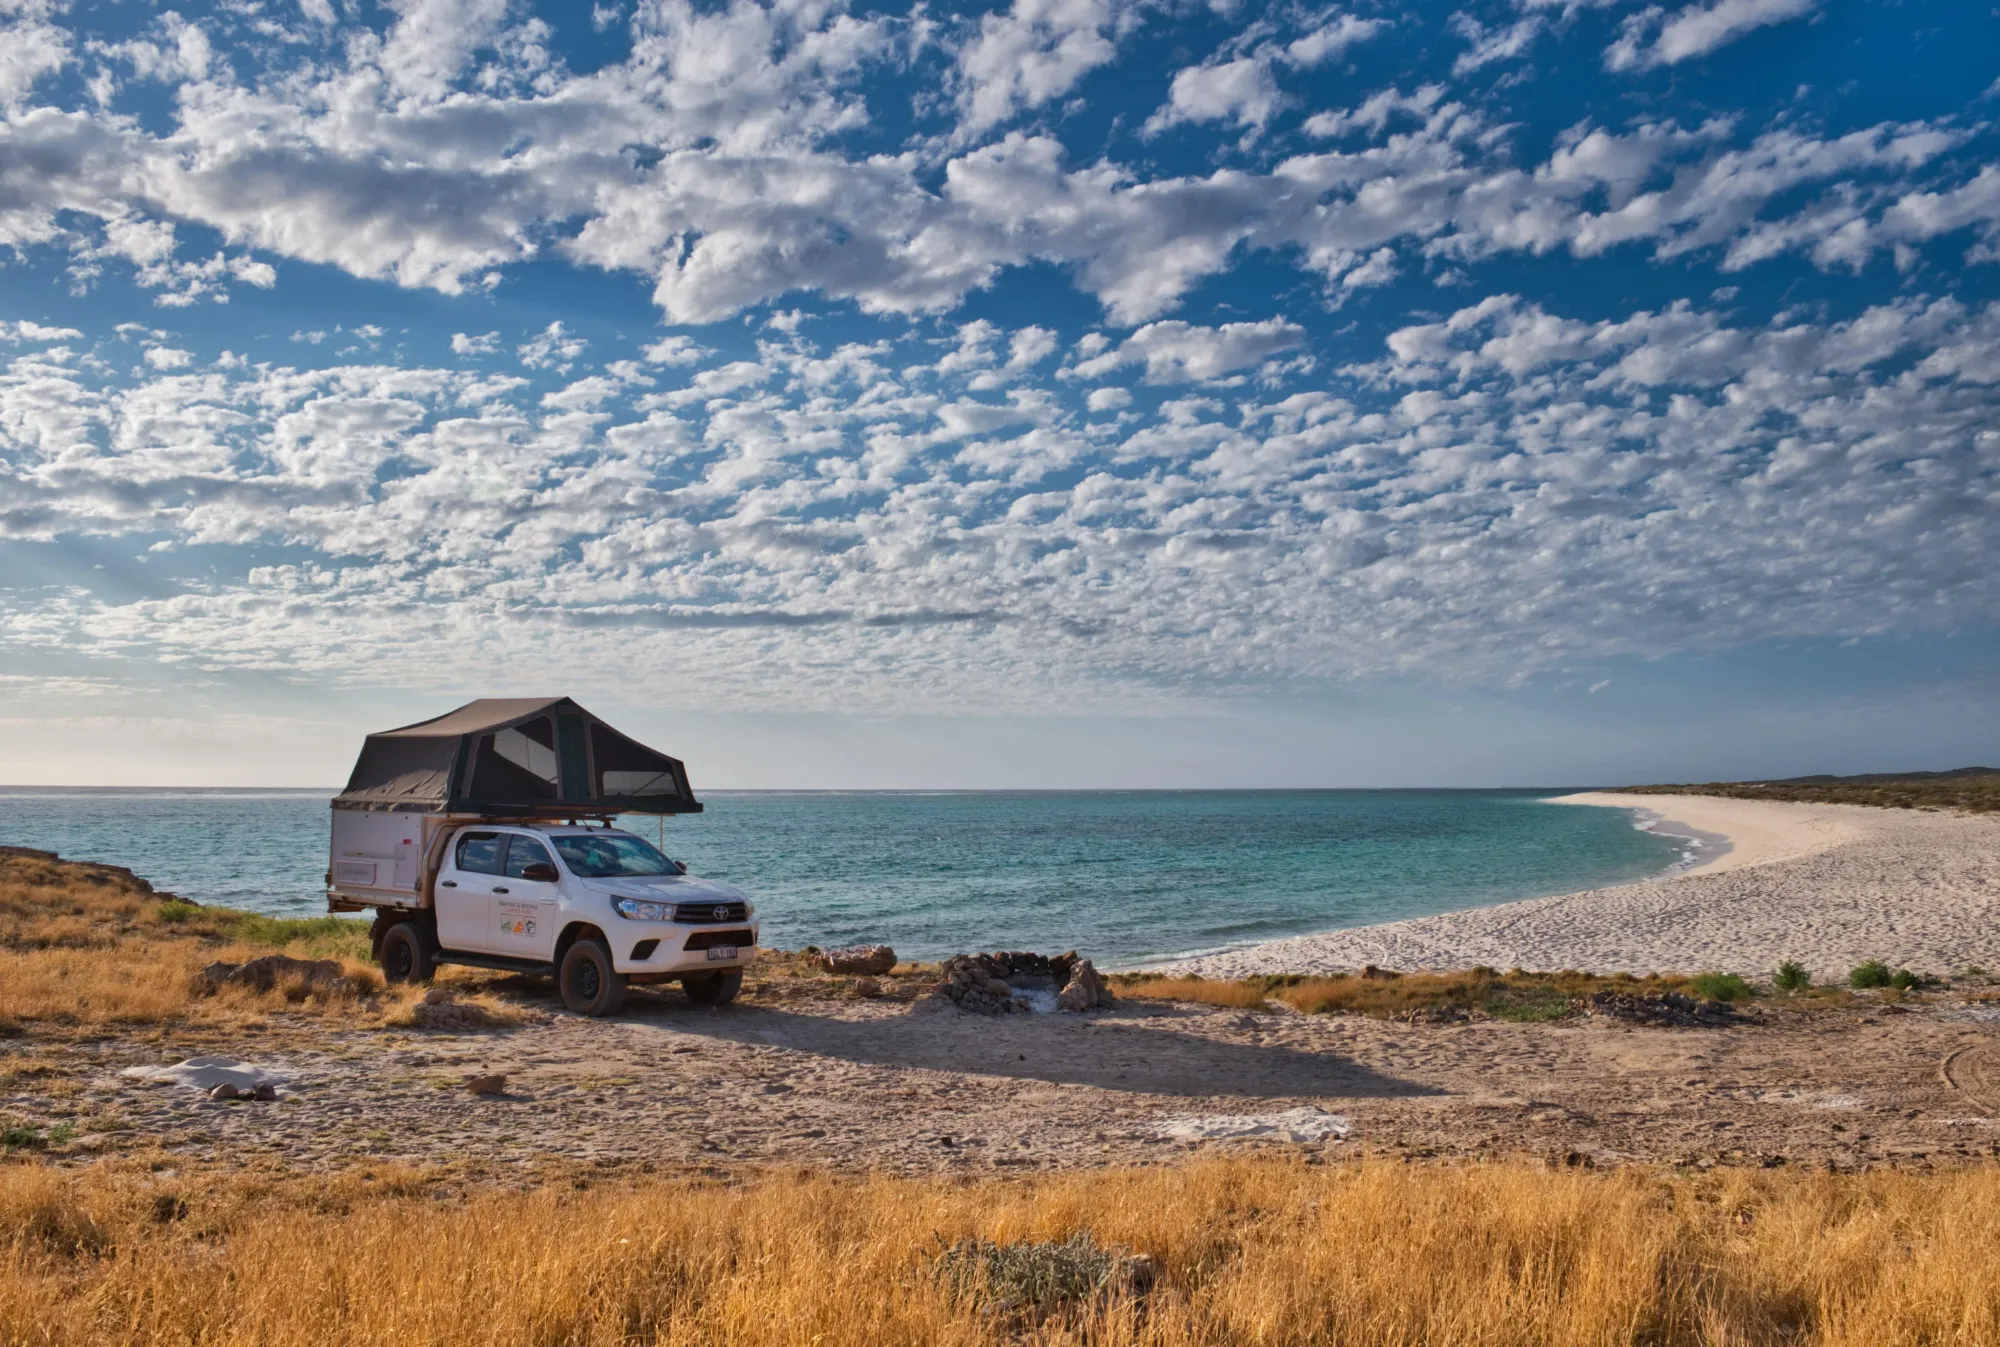 Image of a van on the beach